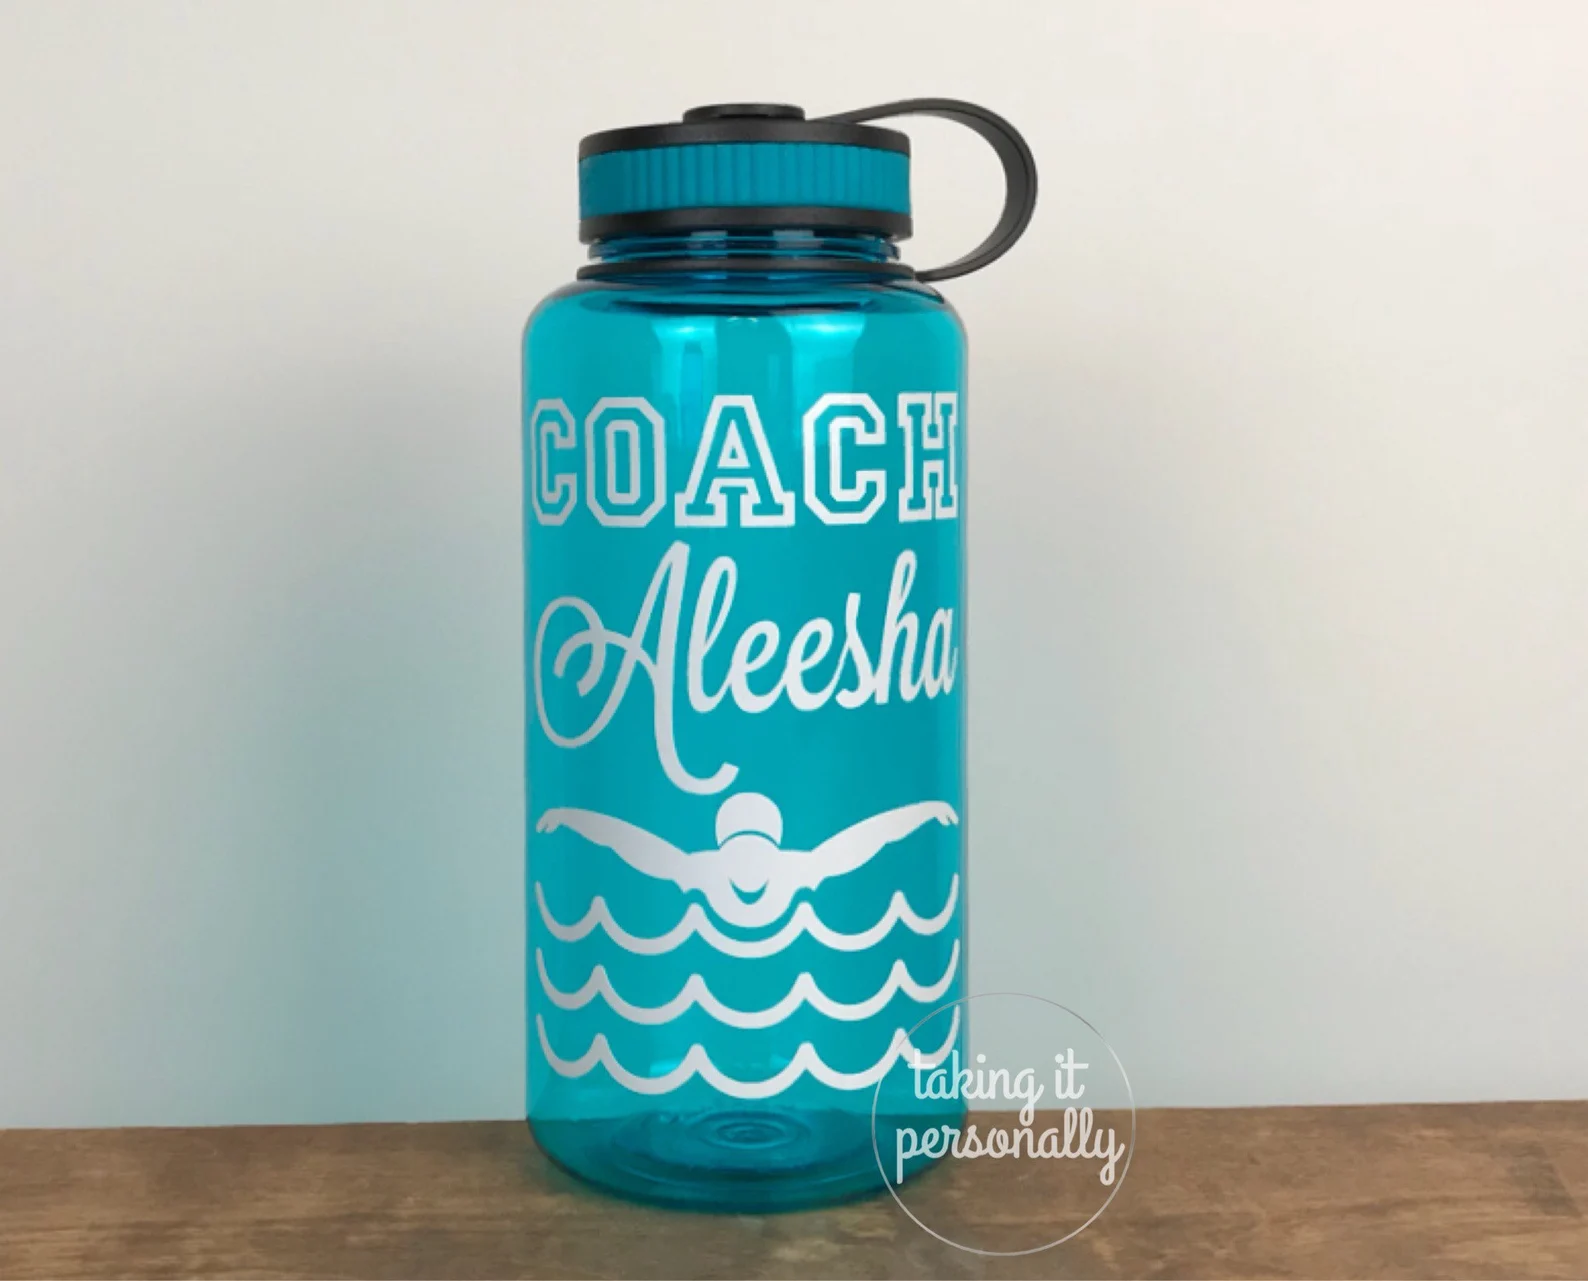 Don't forget Coach on your Senior Swim Night! This Water bottle from taking personally is a fun choice.